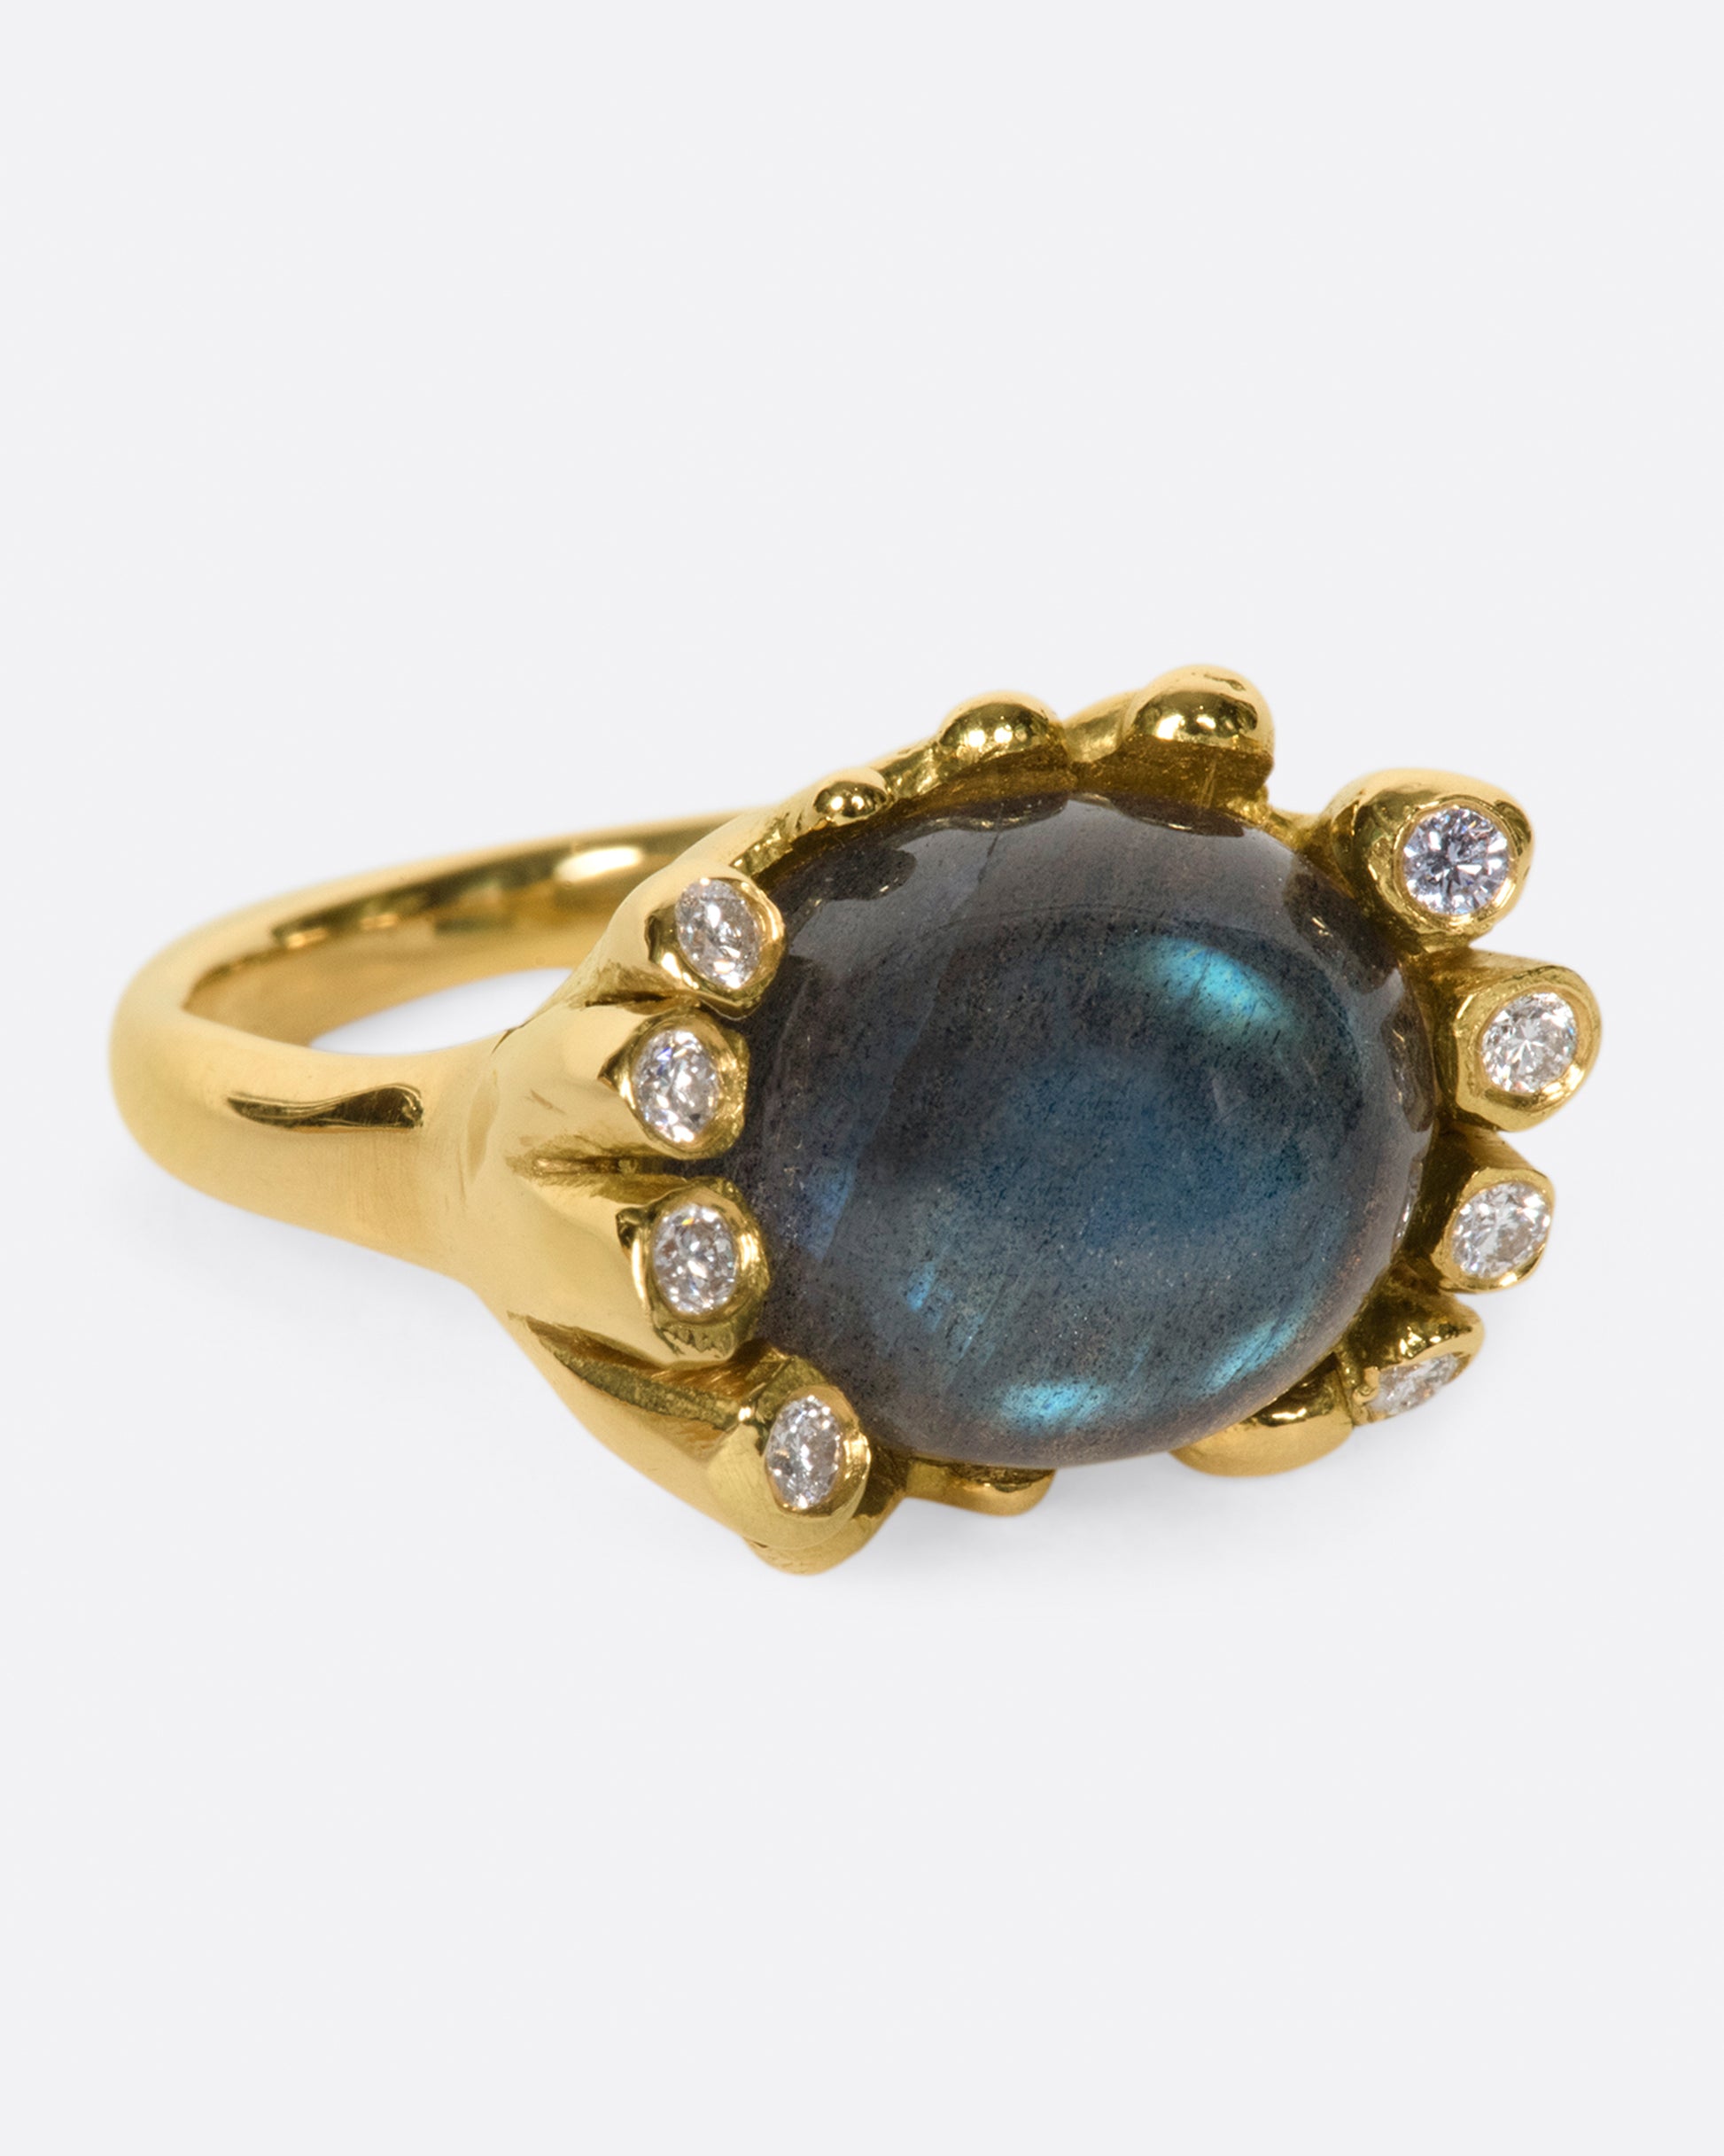 An iridescent labradorite cabochon is nestled amongst diamonds in its handcrafted setting.